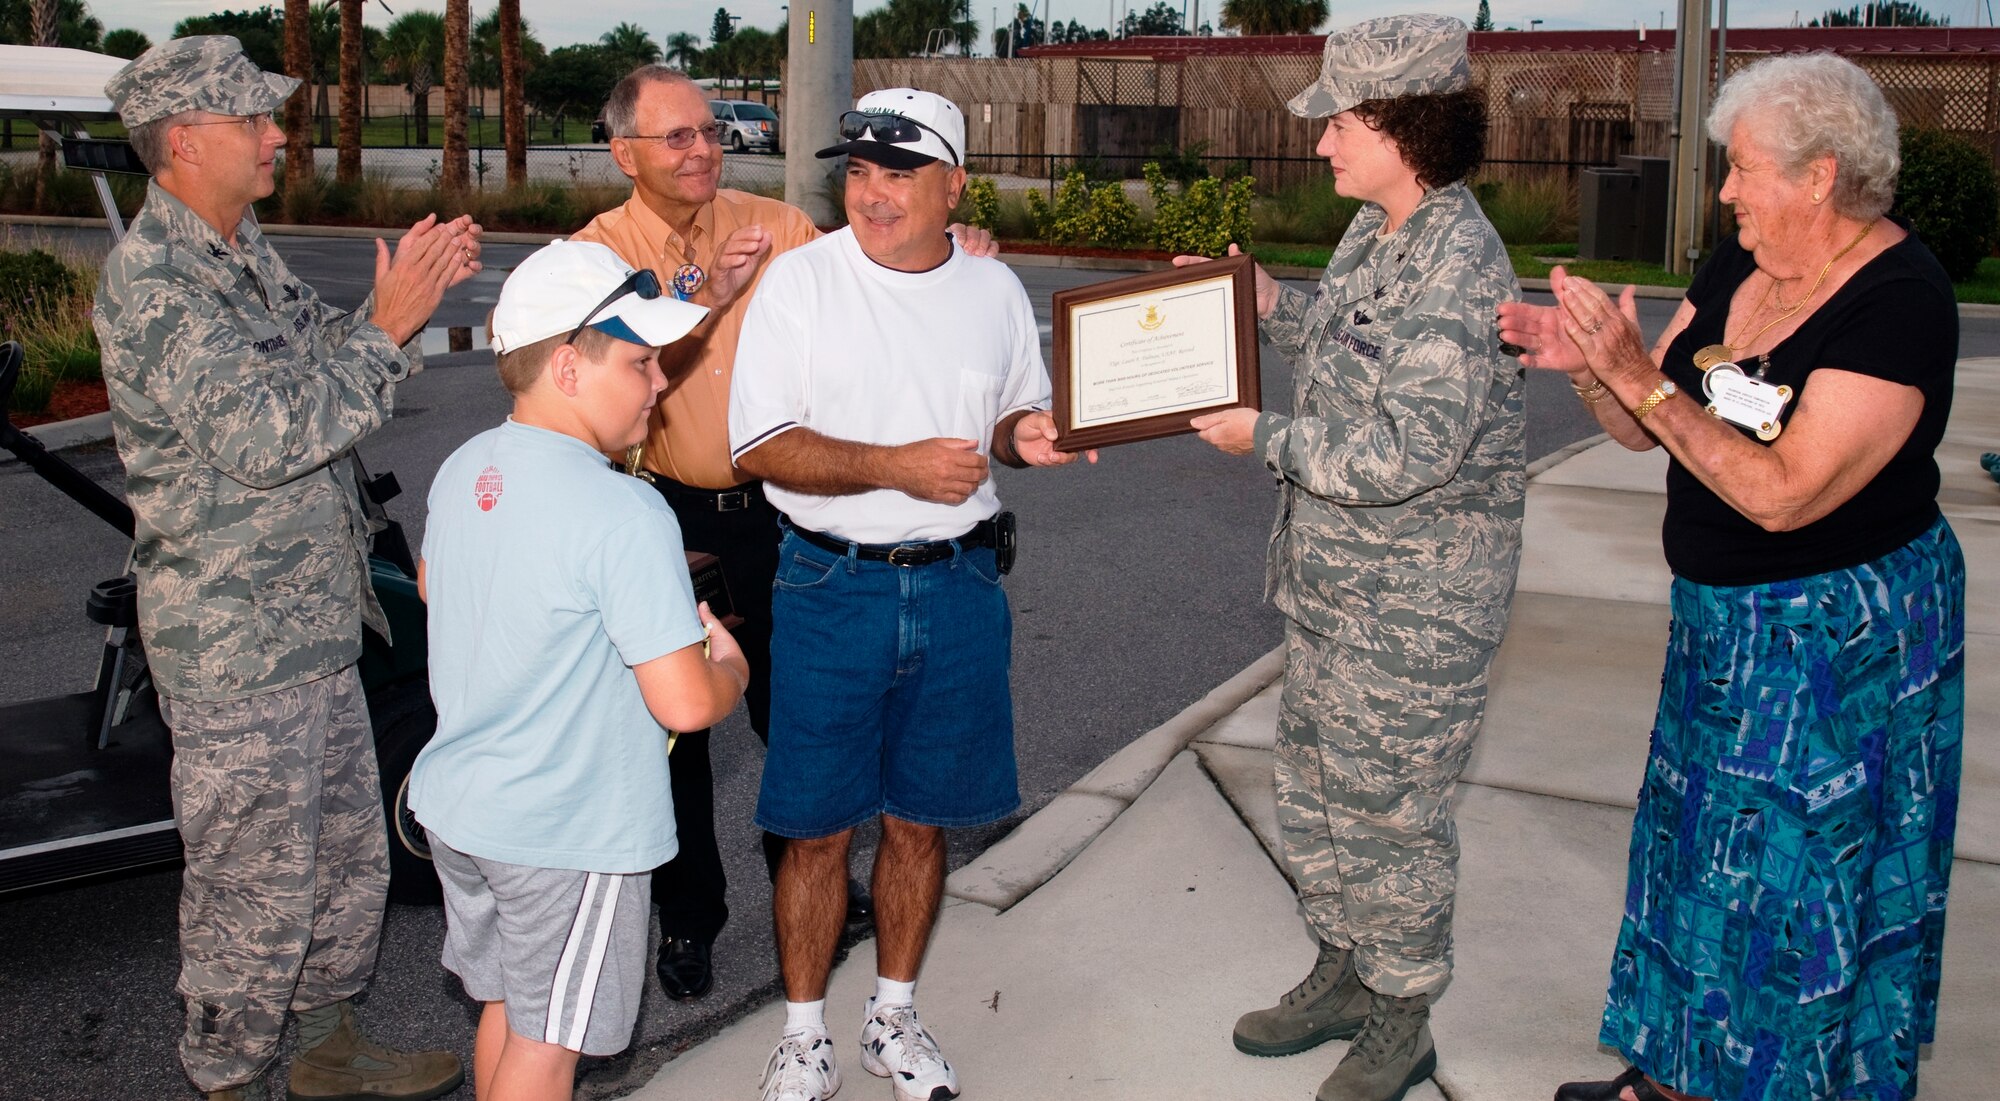 Project Emeritus volunteer Lou Dalmau (center in white shirt) receives a plaque from 45th Space Wing Commander Susan Helms Tuesday morning at the Manatee Cove Golf Course. A retired Air Force technical sergeant, Mr. Dalmau has accumulated more than 3,000 volunteer hours ferrying customers around the course in the shuttle golf cart he operates. (U.S. Air Force photo by Jim Laviska).